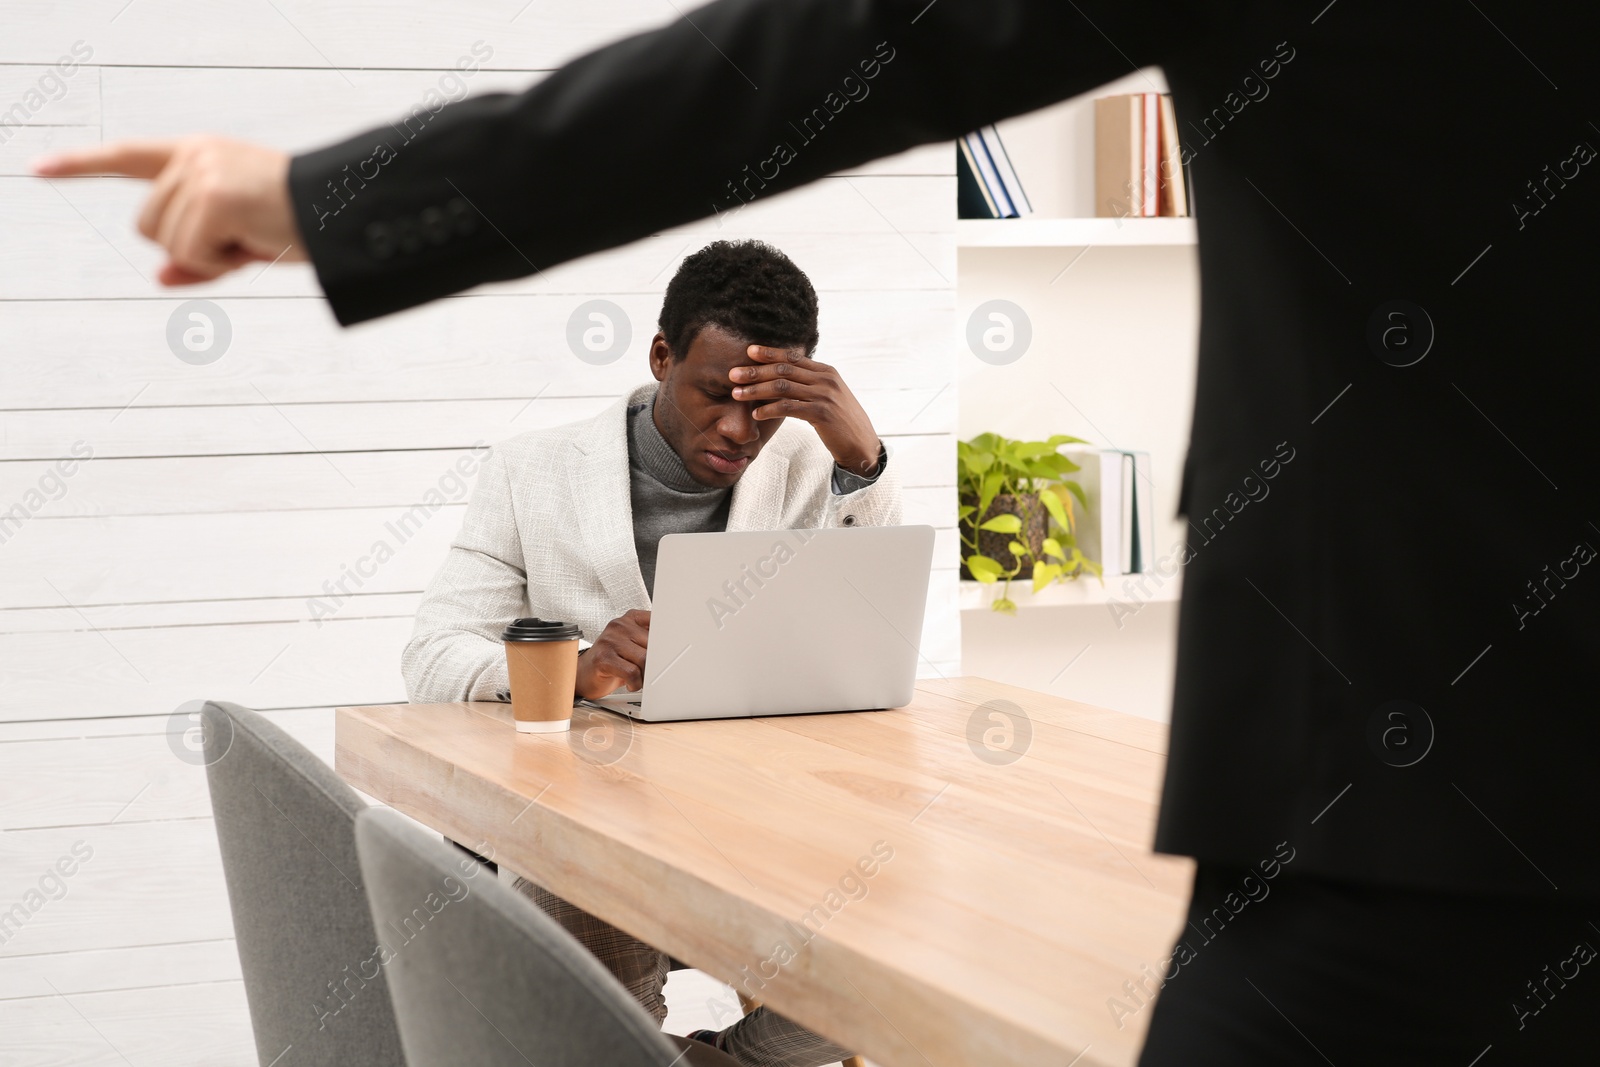 Photo of African American man suffering from racial discrimination at work